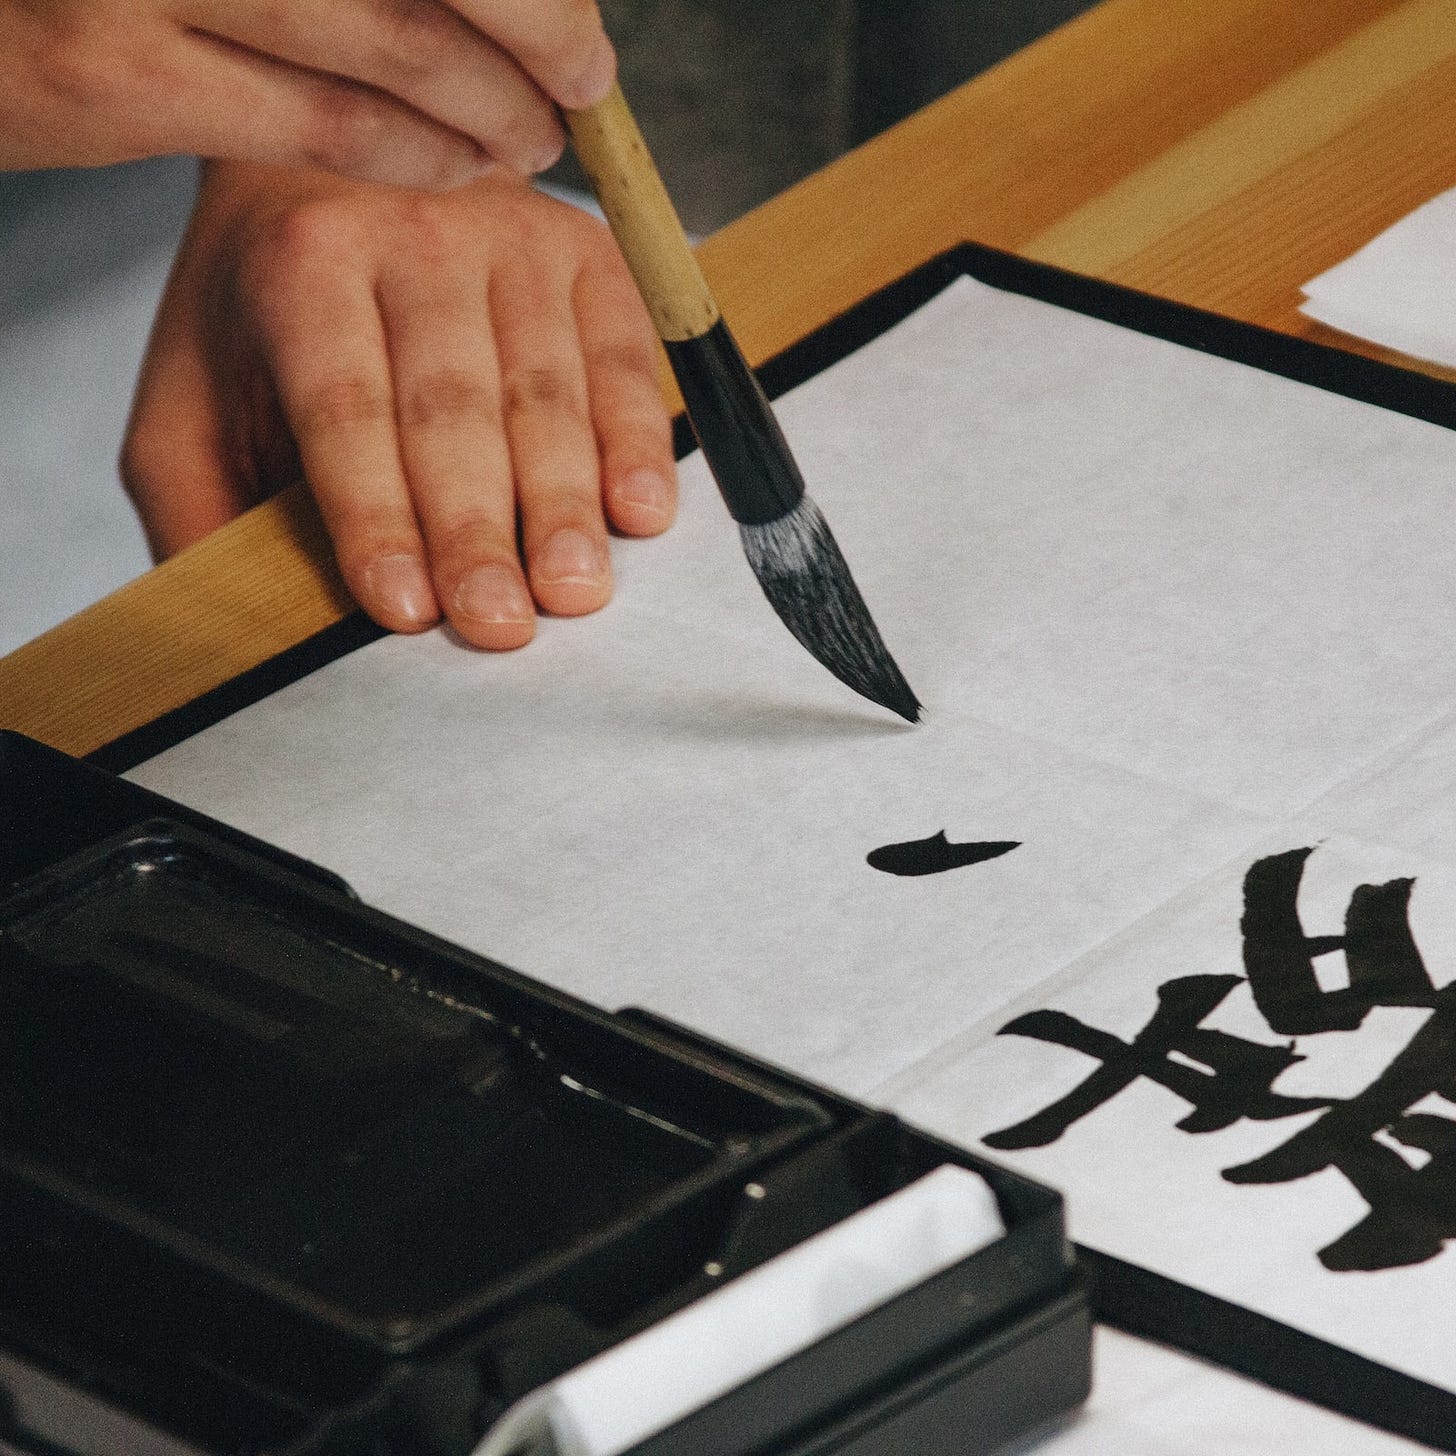 New Year's calligraphy